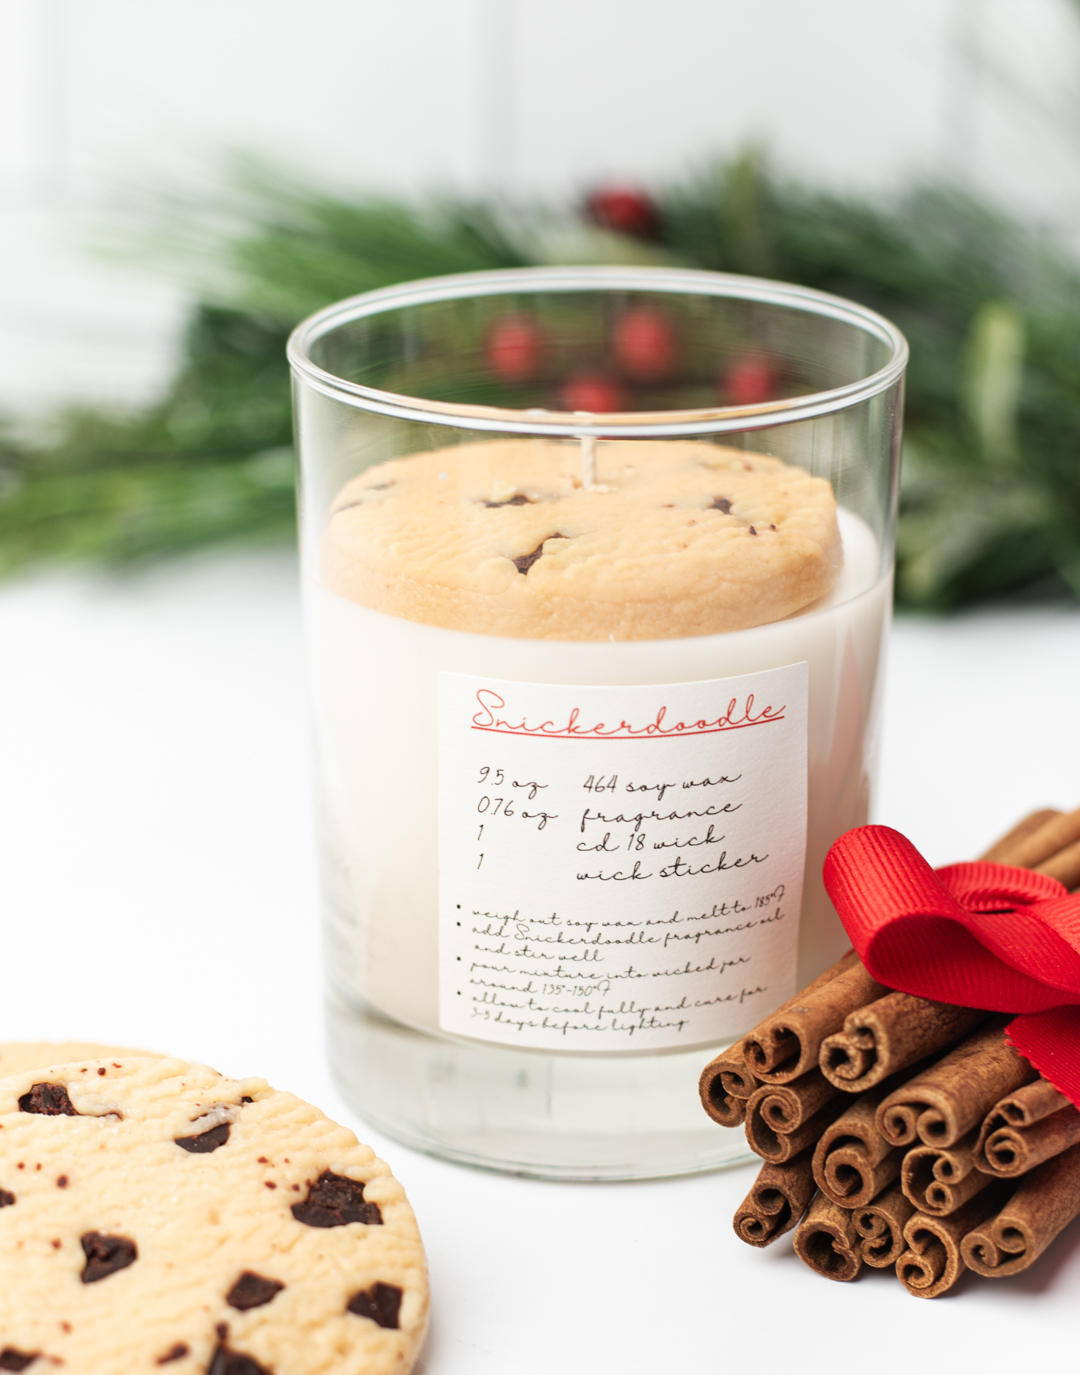 A candle that looks like a glass of milk with a cookie on top of it. On the candle, a white label reads "Snickerdoodle" and looks like a recipe. Beside the candle rests a bundle of cinnamon bark held together with red ribbon. 